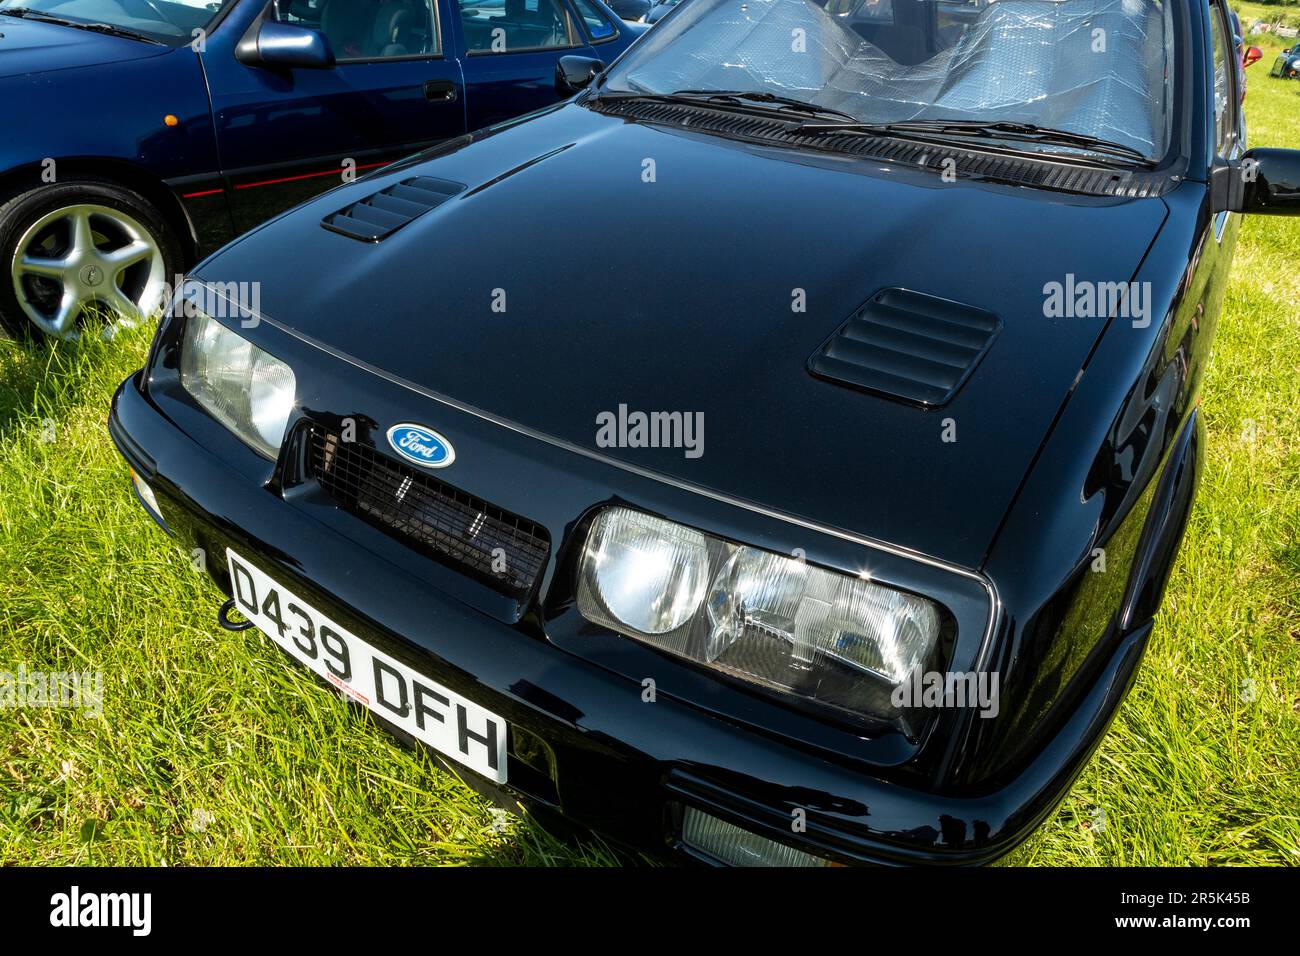 1987 Ford Sierra RS Cosworth. Classic car meet at Hanley Farm, Chepstow. Stock Photo